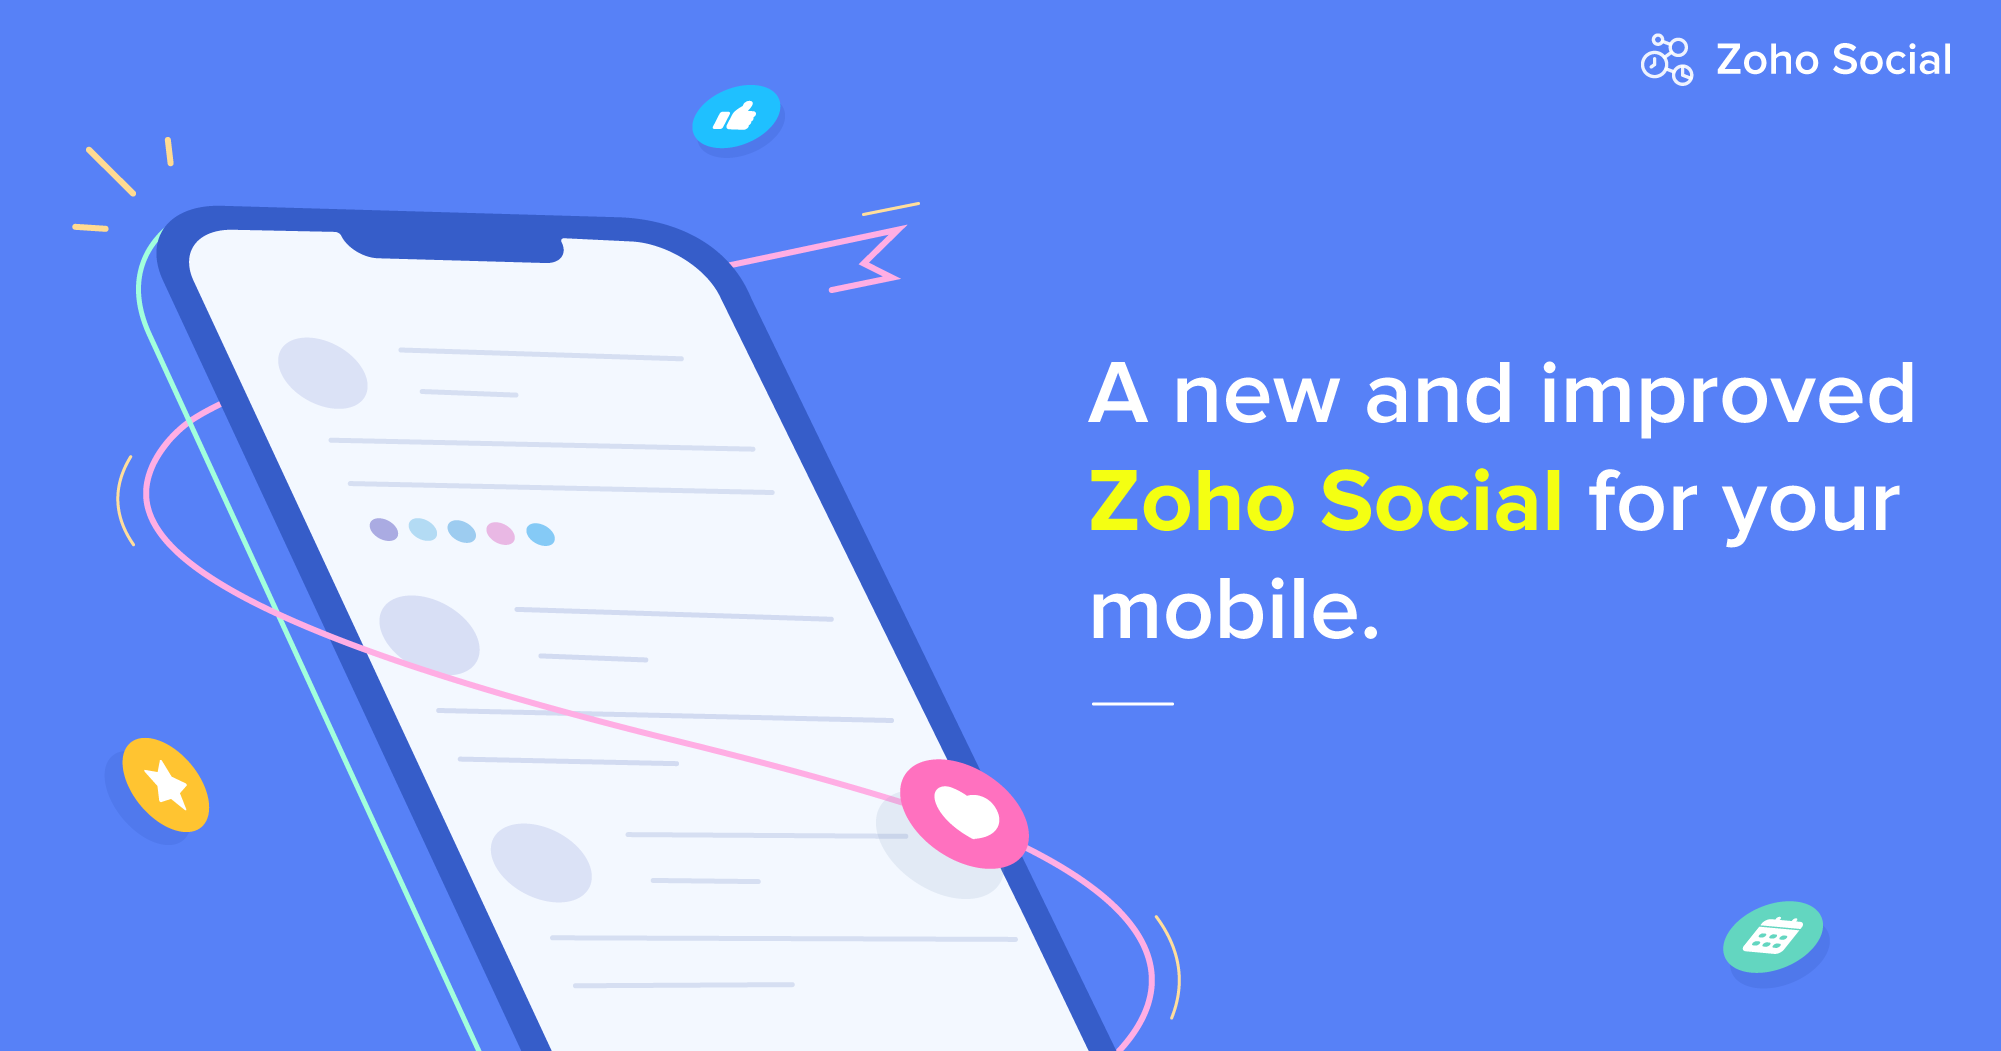 It's finally here! An all-new Zoho Social for your mobile